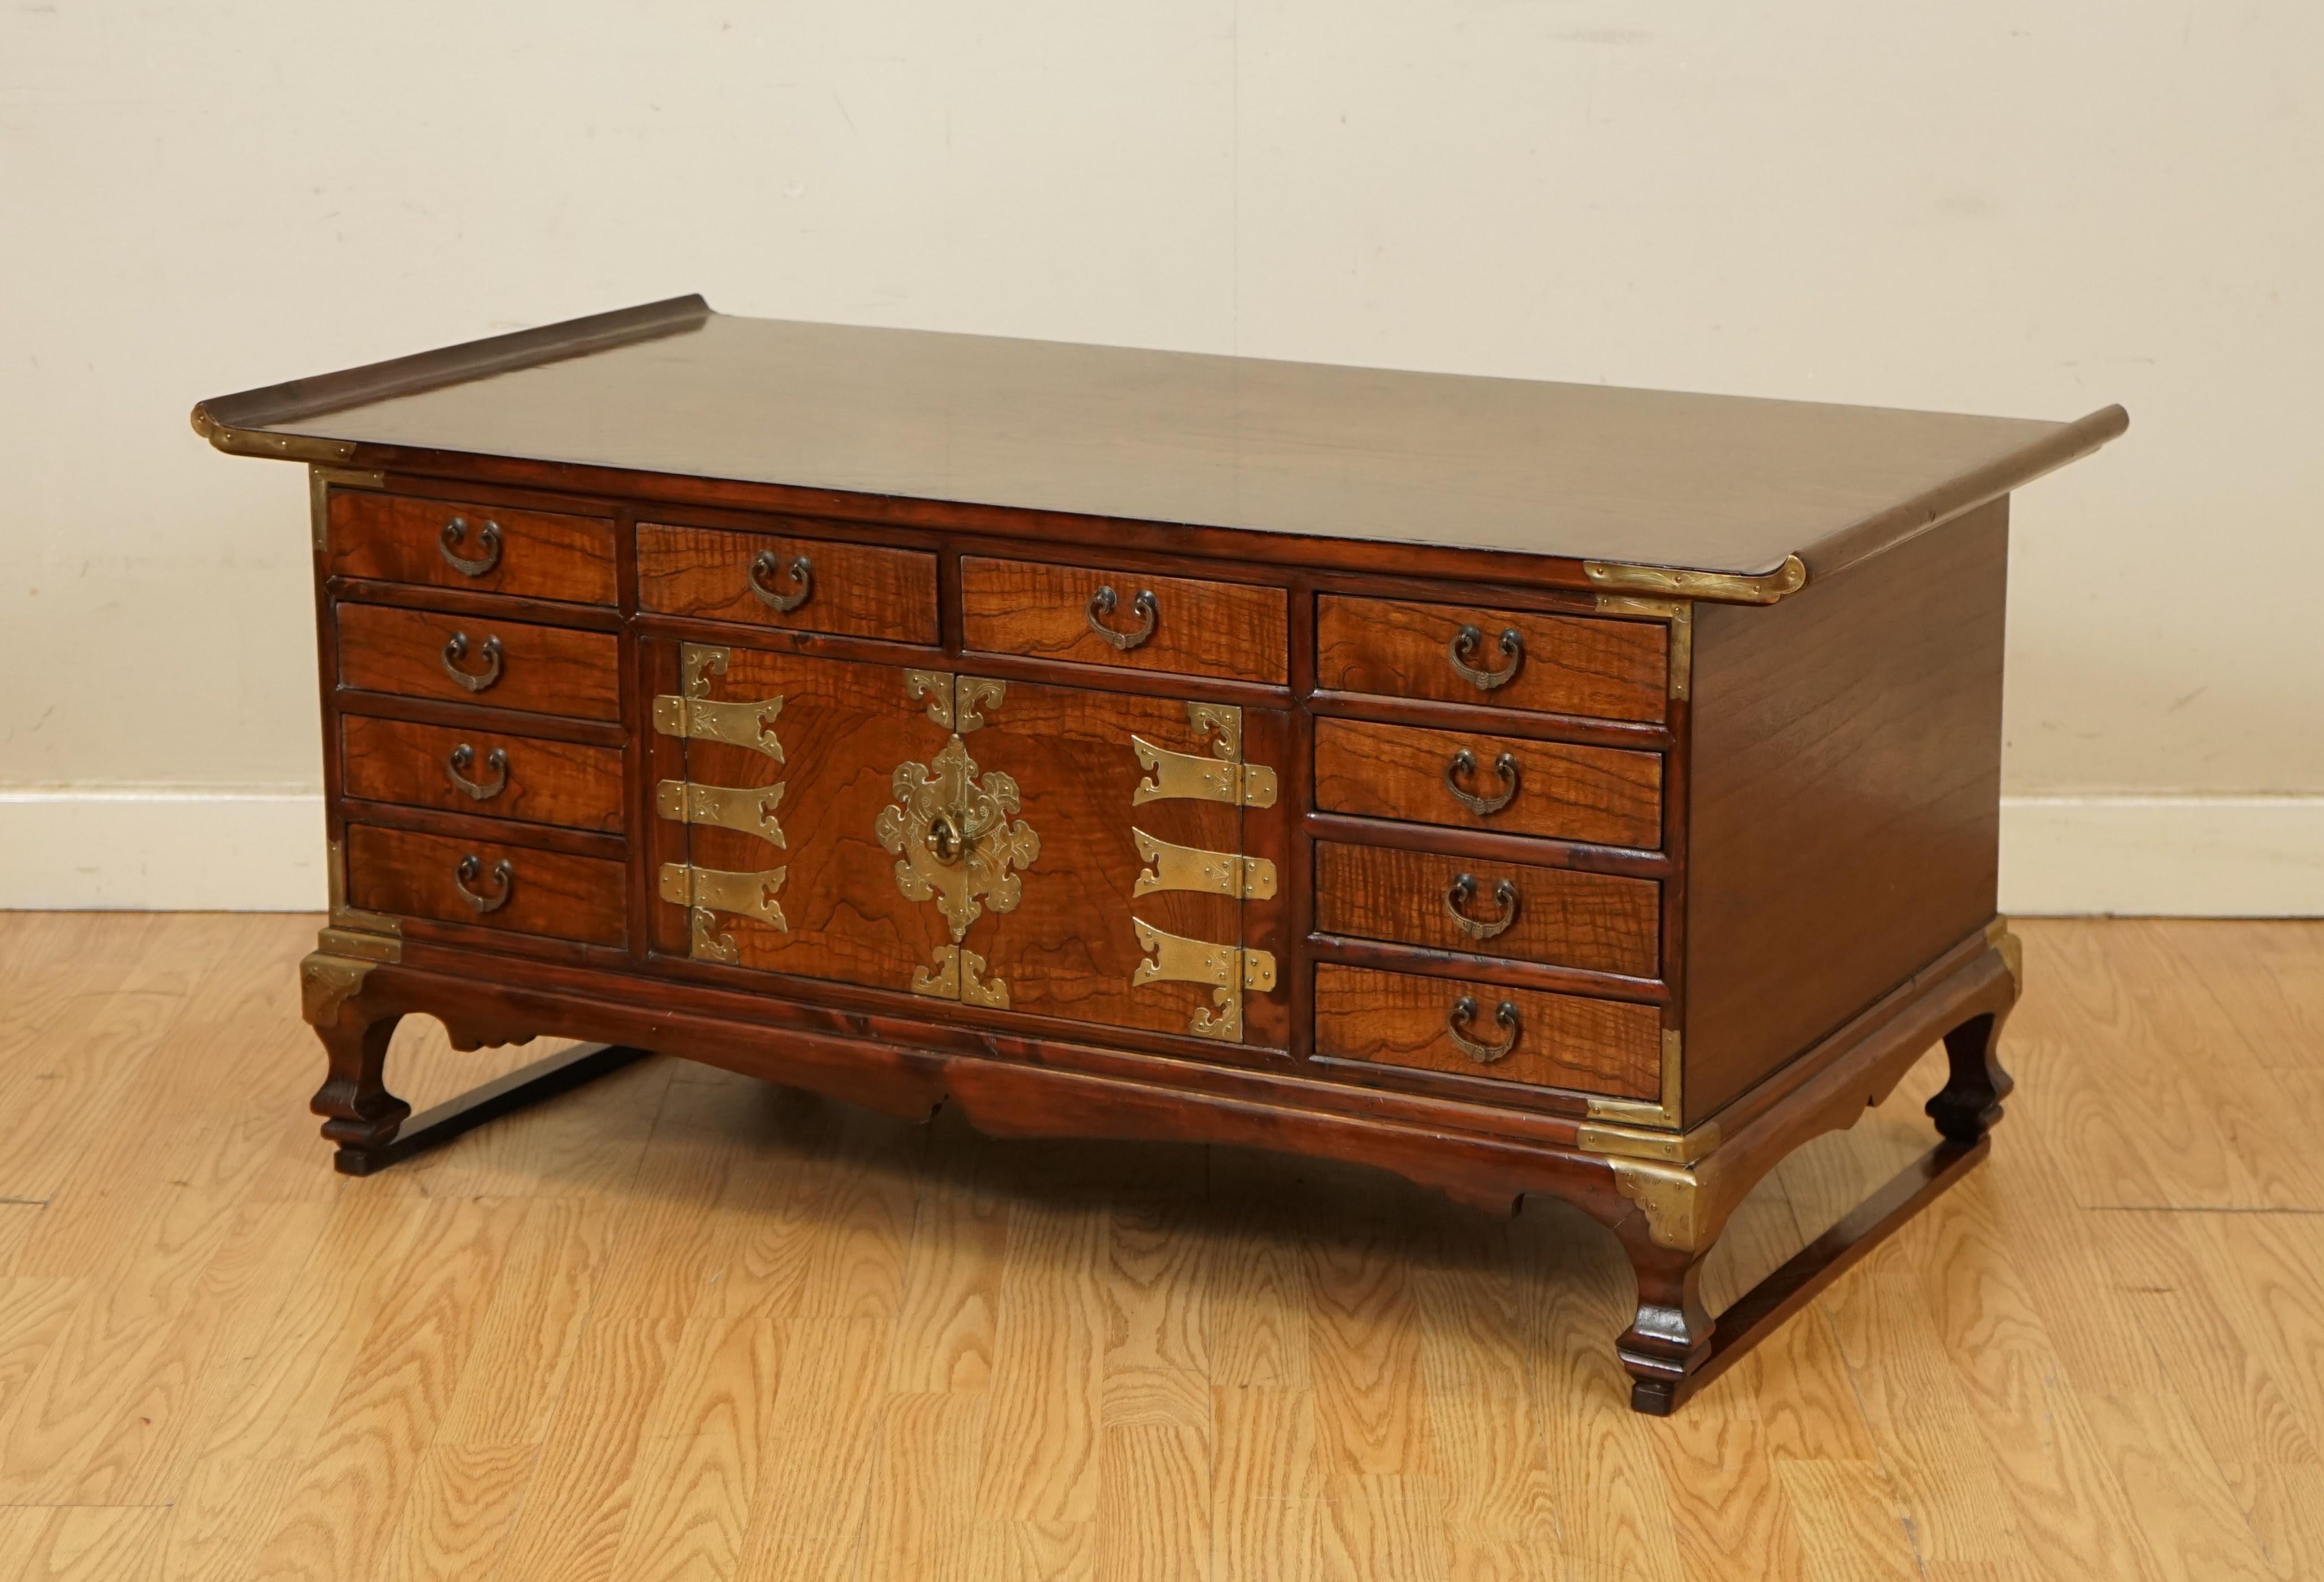 Hand-Crafted Beautiful Late 19th Century Korean Elm Coffee Table with Lots of Drawers